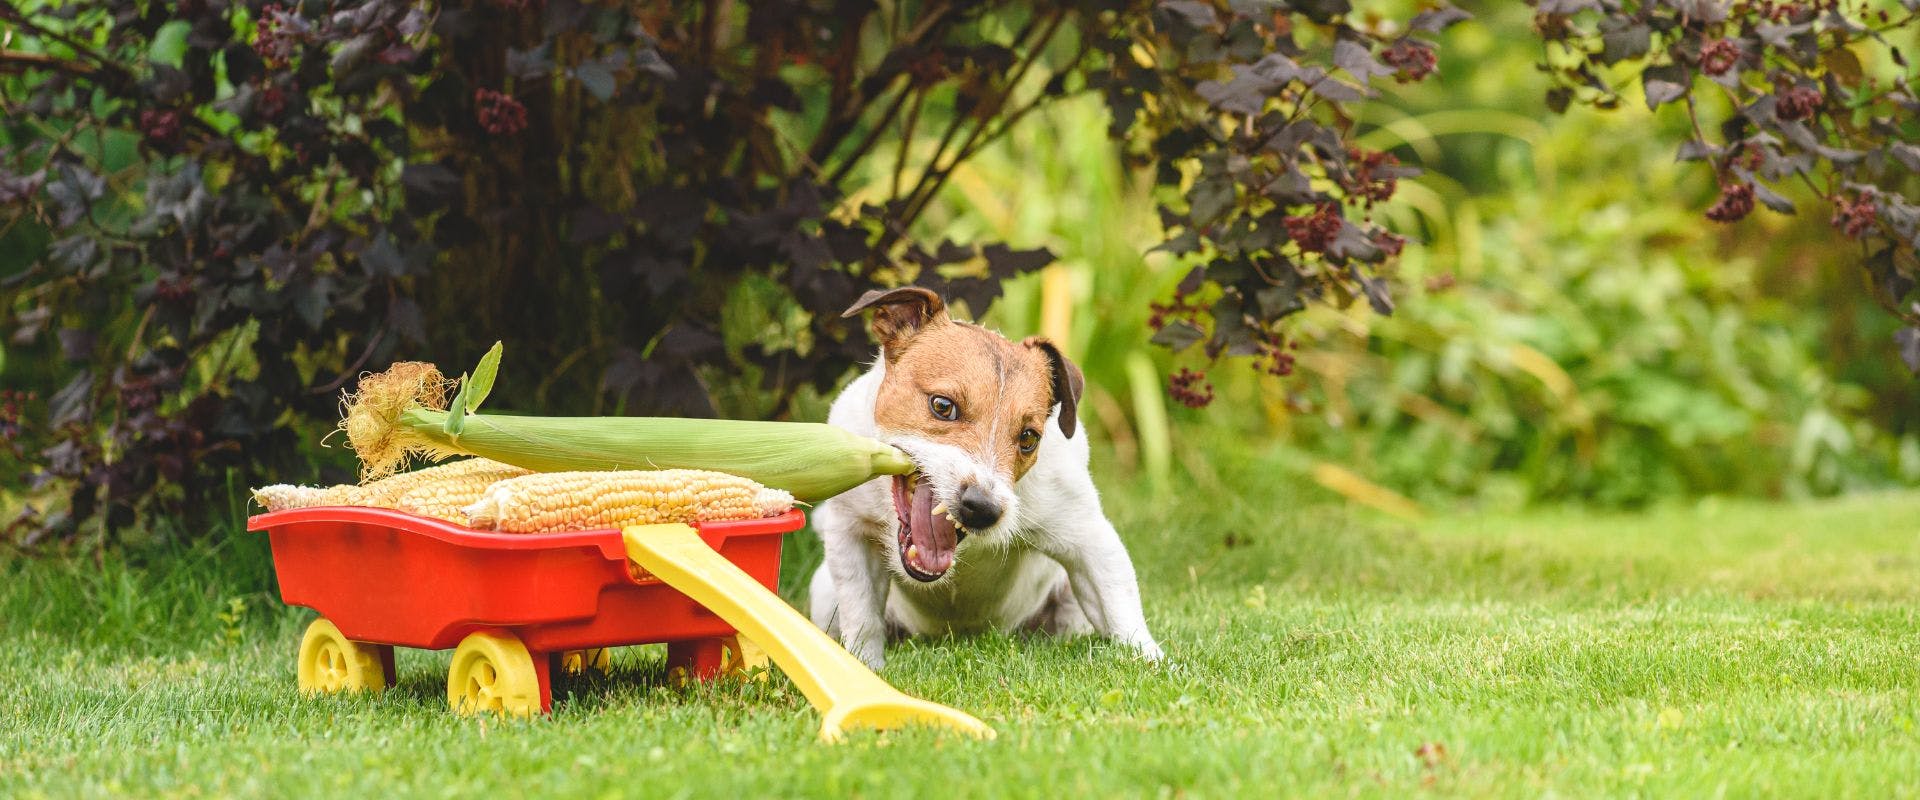 Jack Russell Terrier gnawing on a corn husk